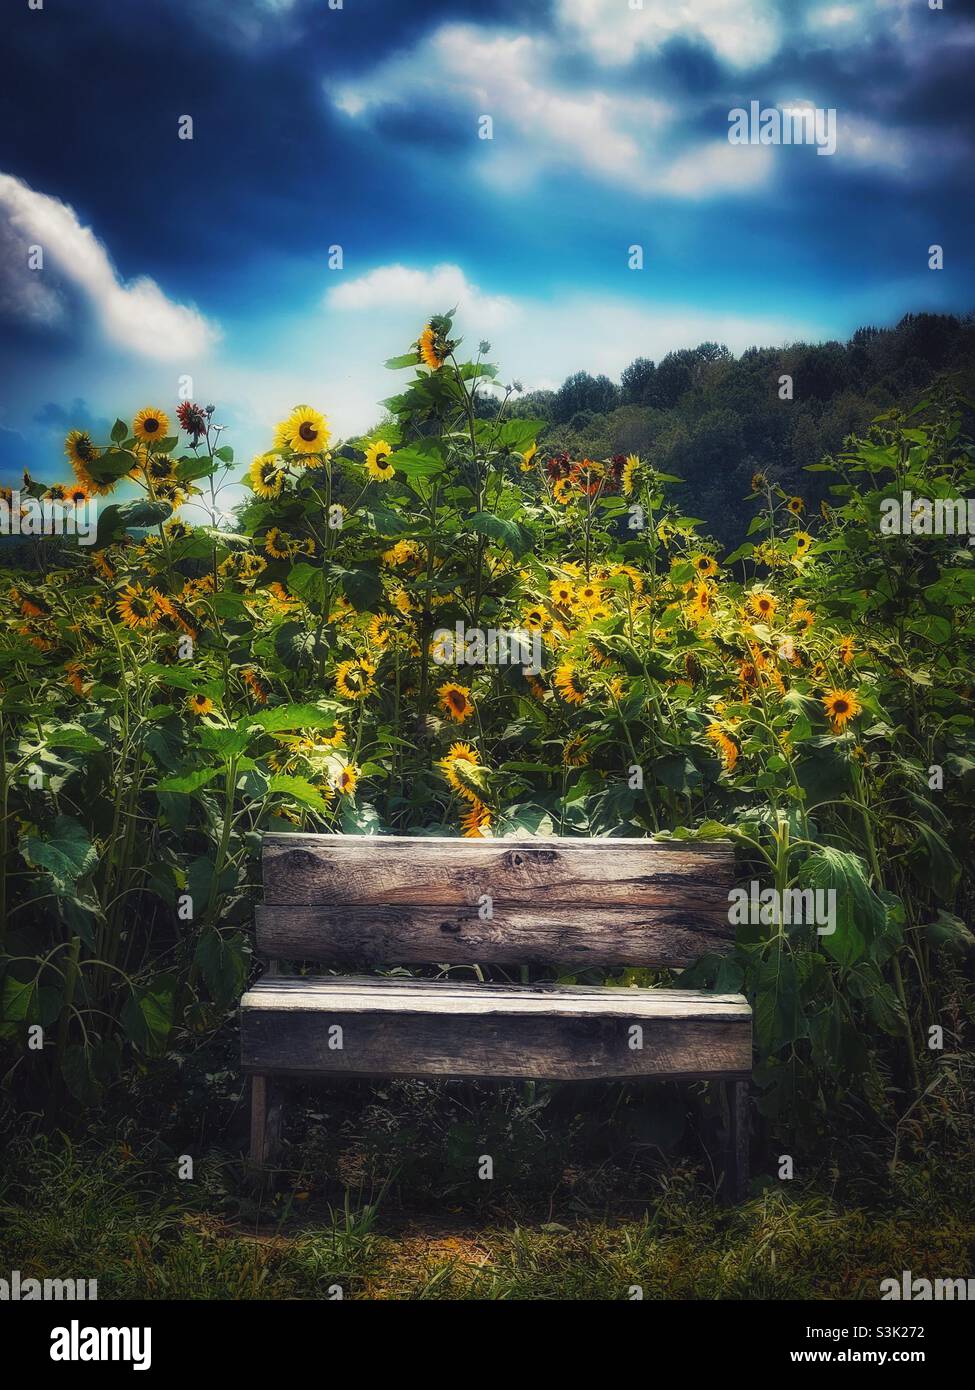 Rustic wooden bench on the edge of a field of sunflowers Stock Photo